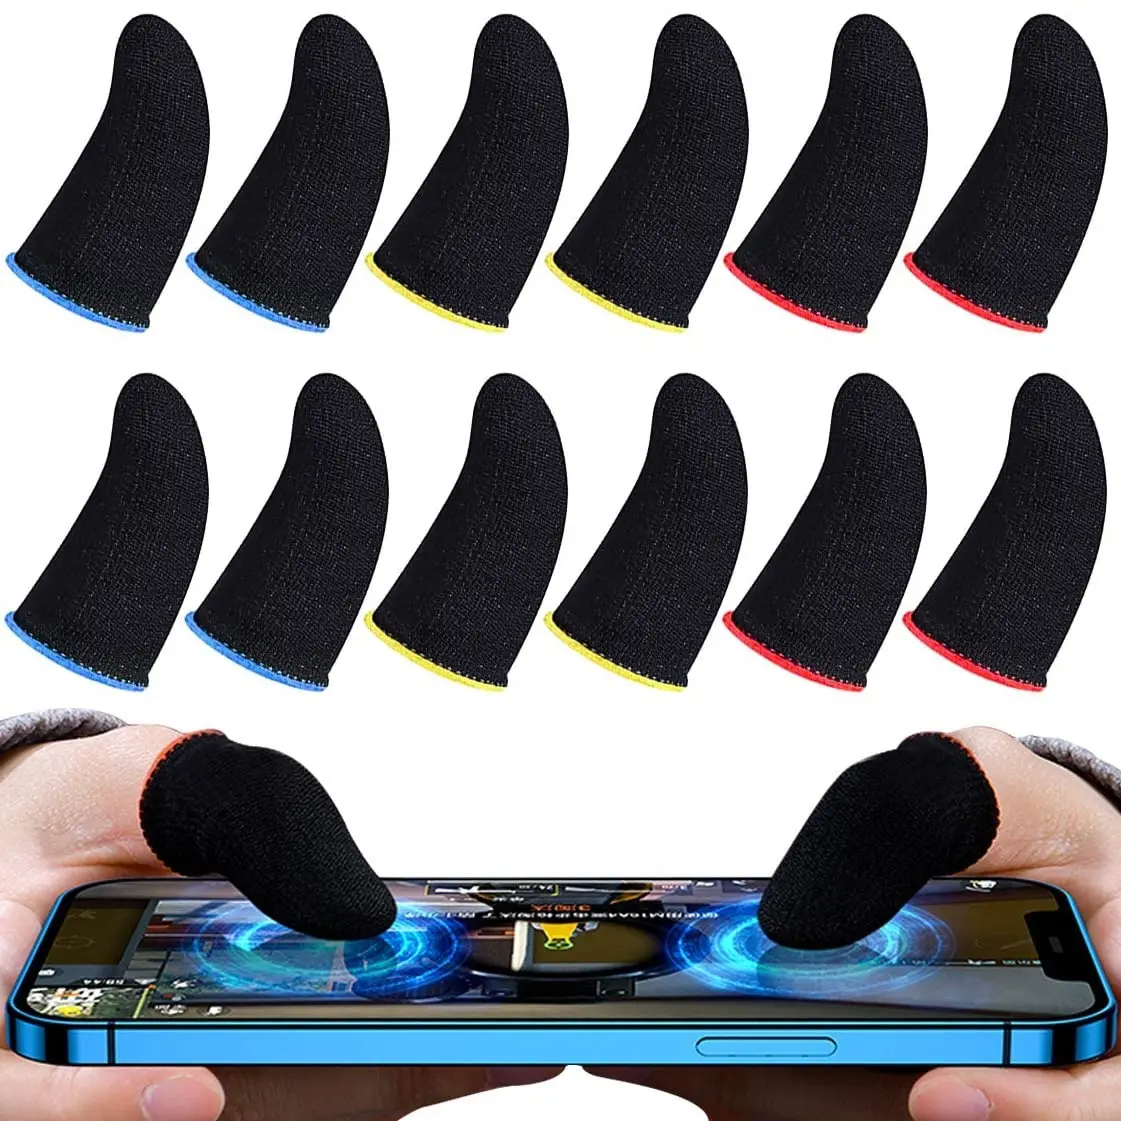 

New Finger Cover Game Controller For PUBG Sweat Proof Non-Scratch Sensitive Touch Screen Gaming Finger Thumb Sleeve Gloves